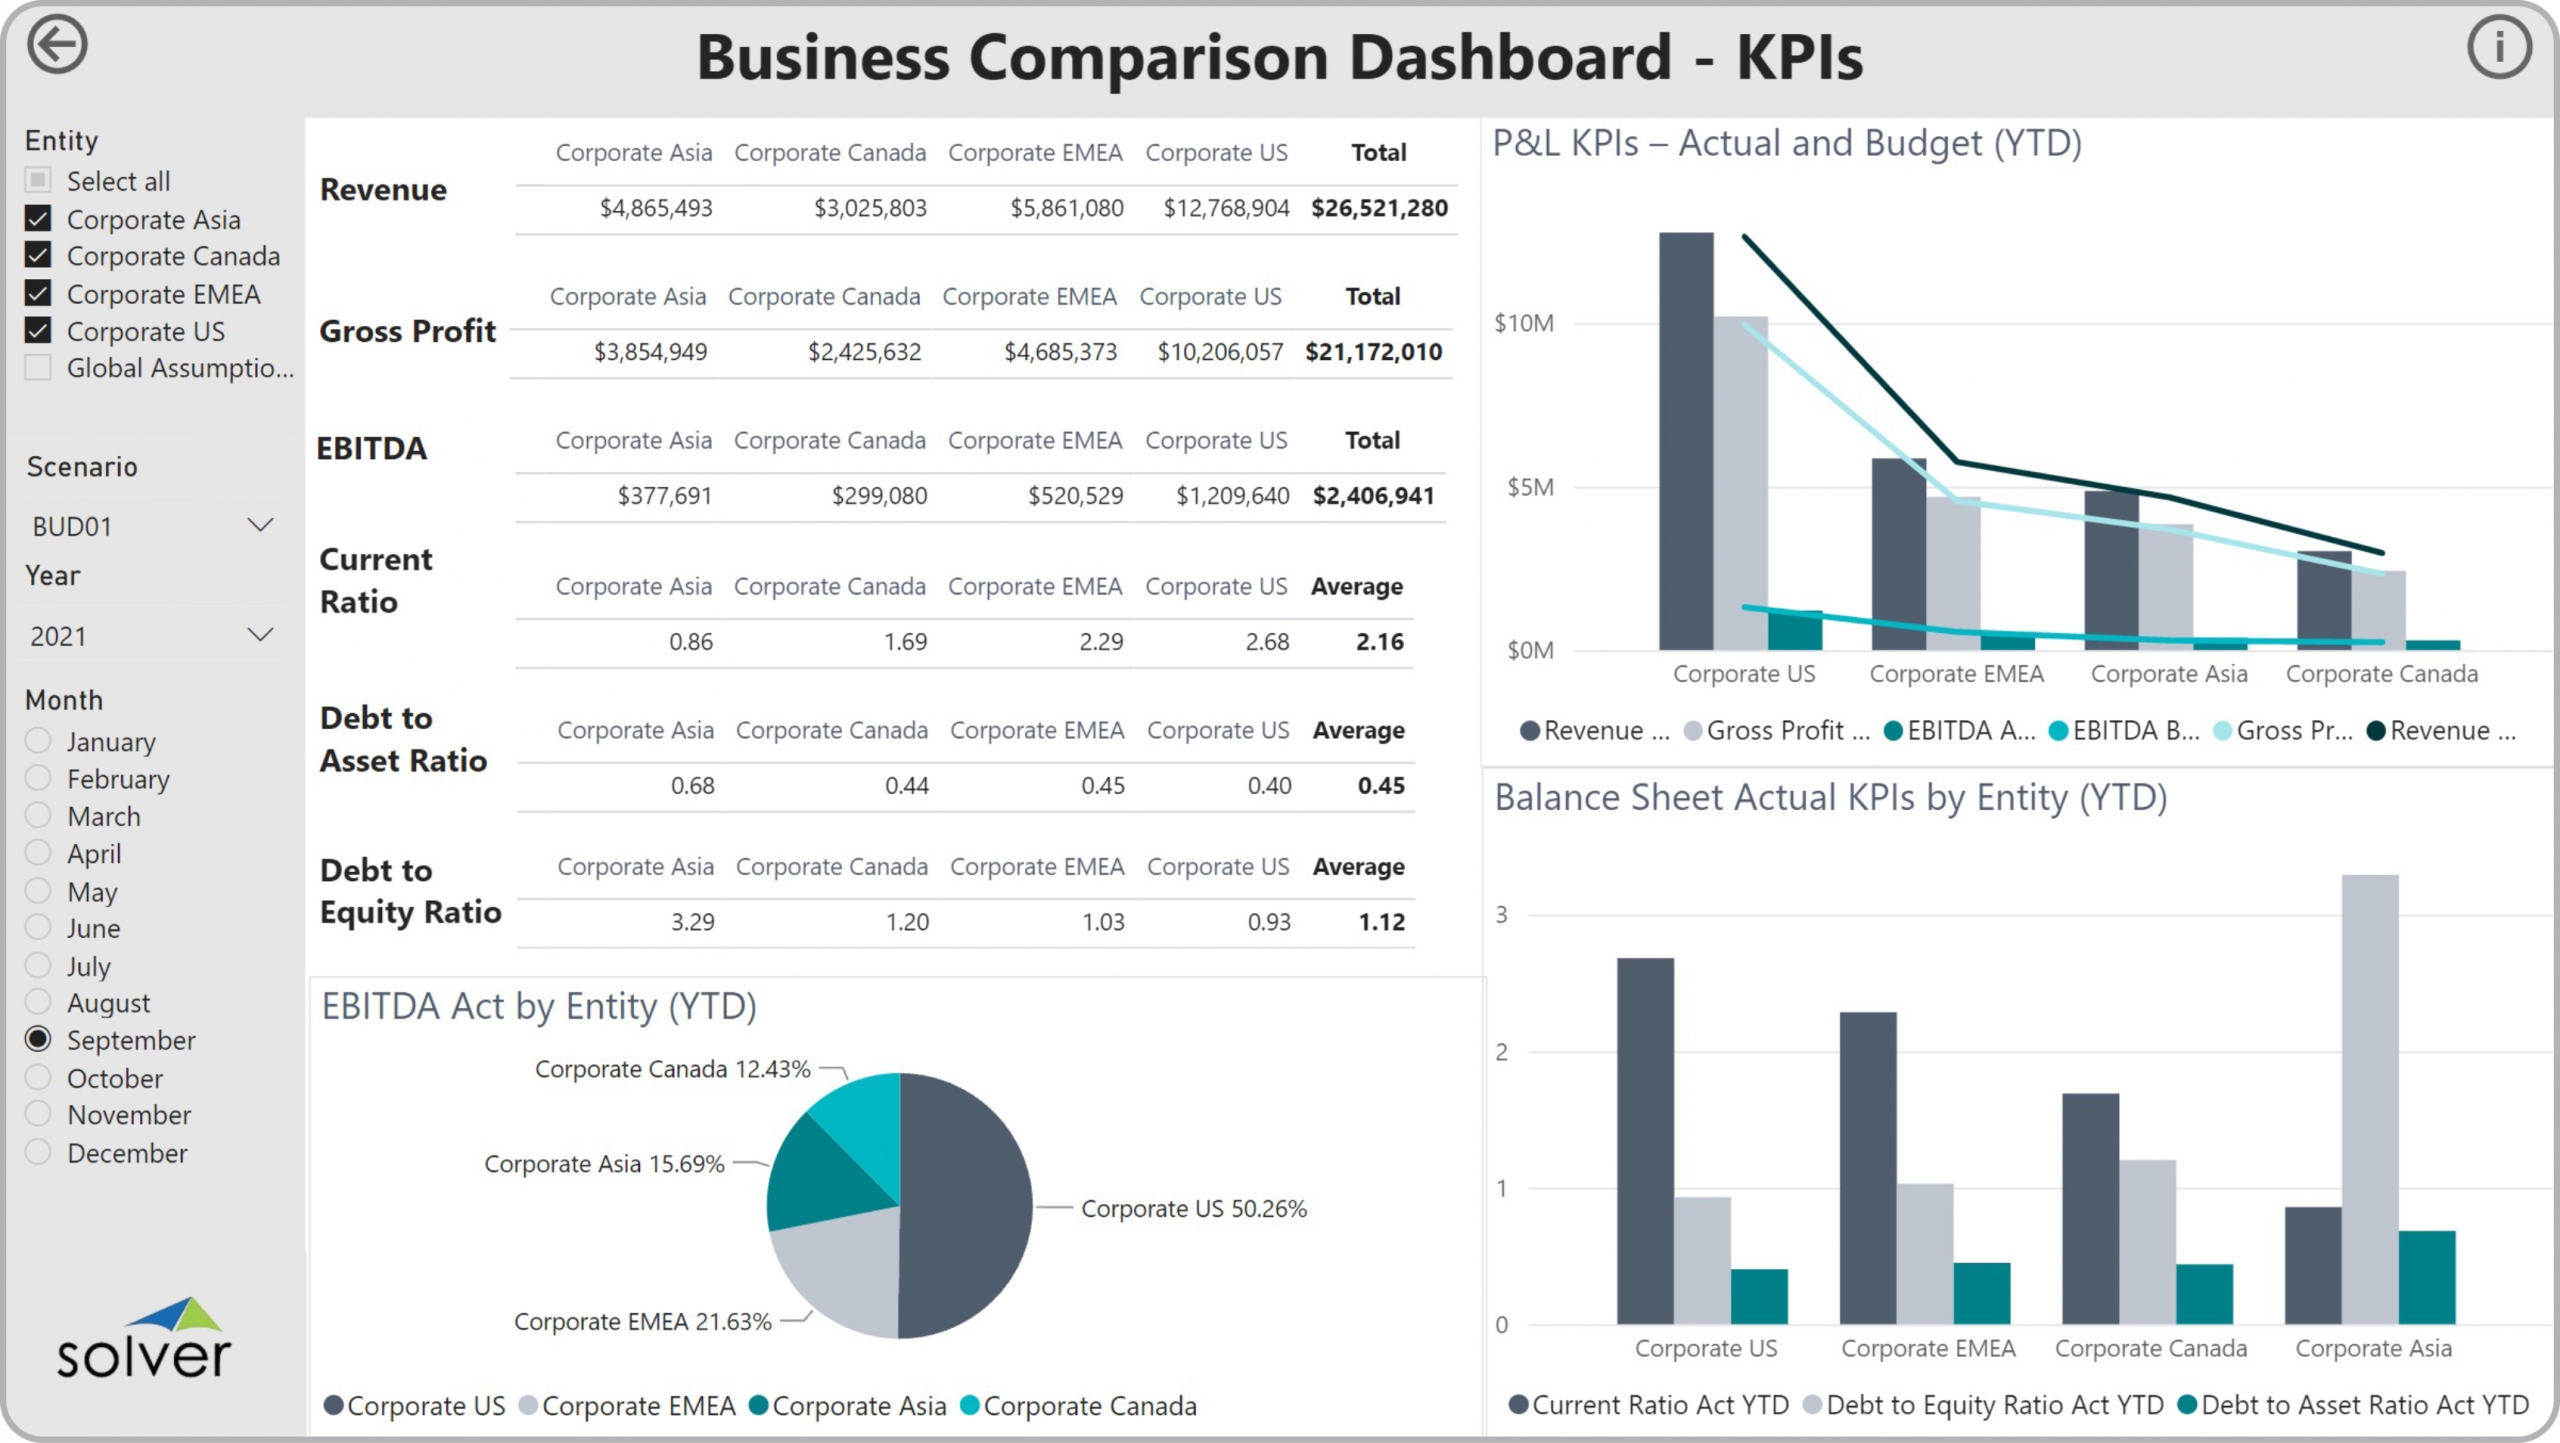 Example of a KPI Comparison Dashboard to Streamline the Monthly Reporting Process